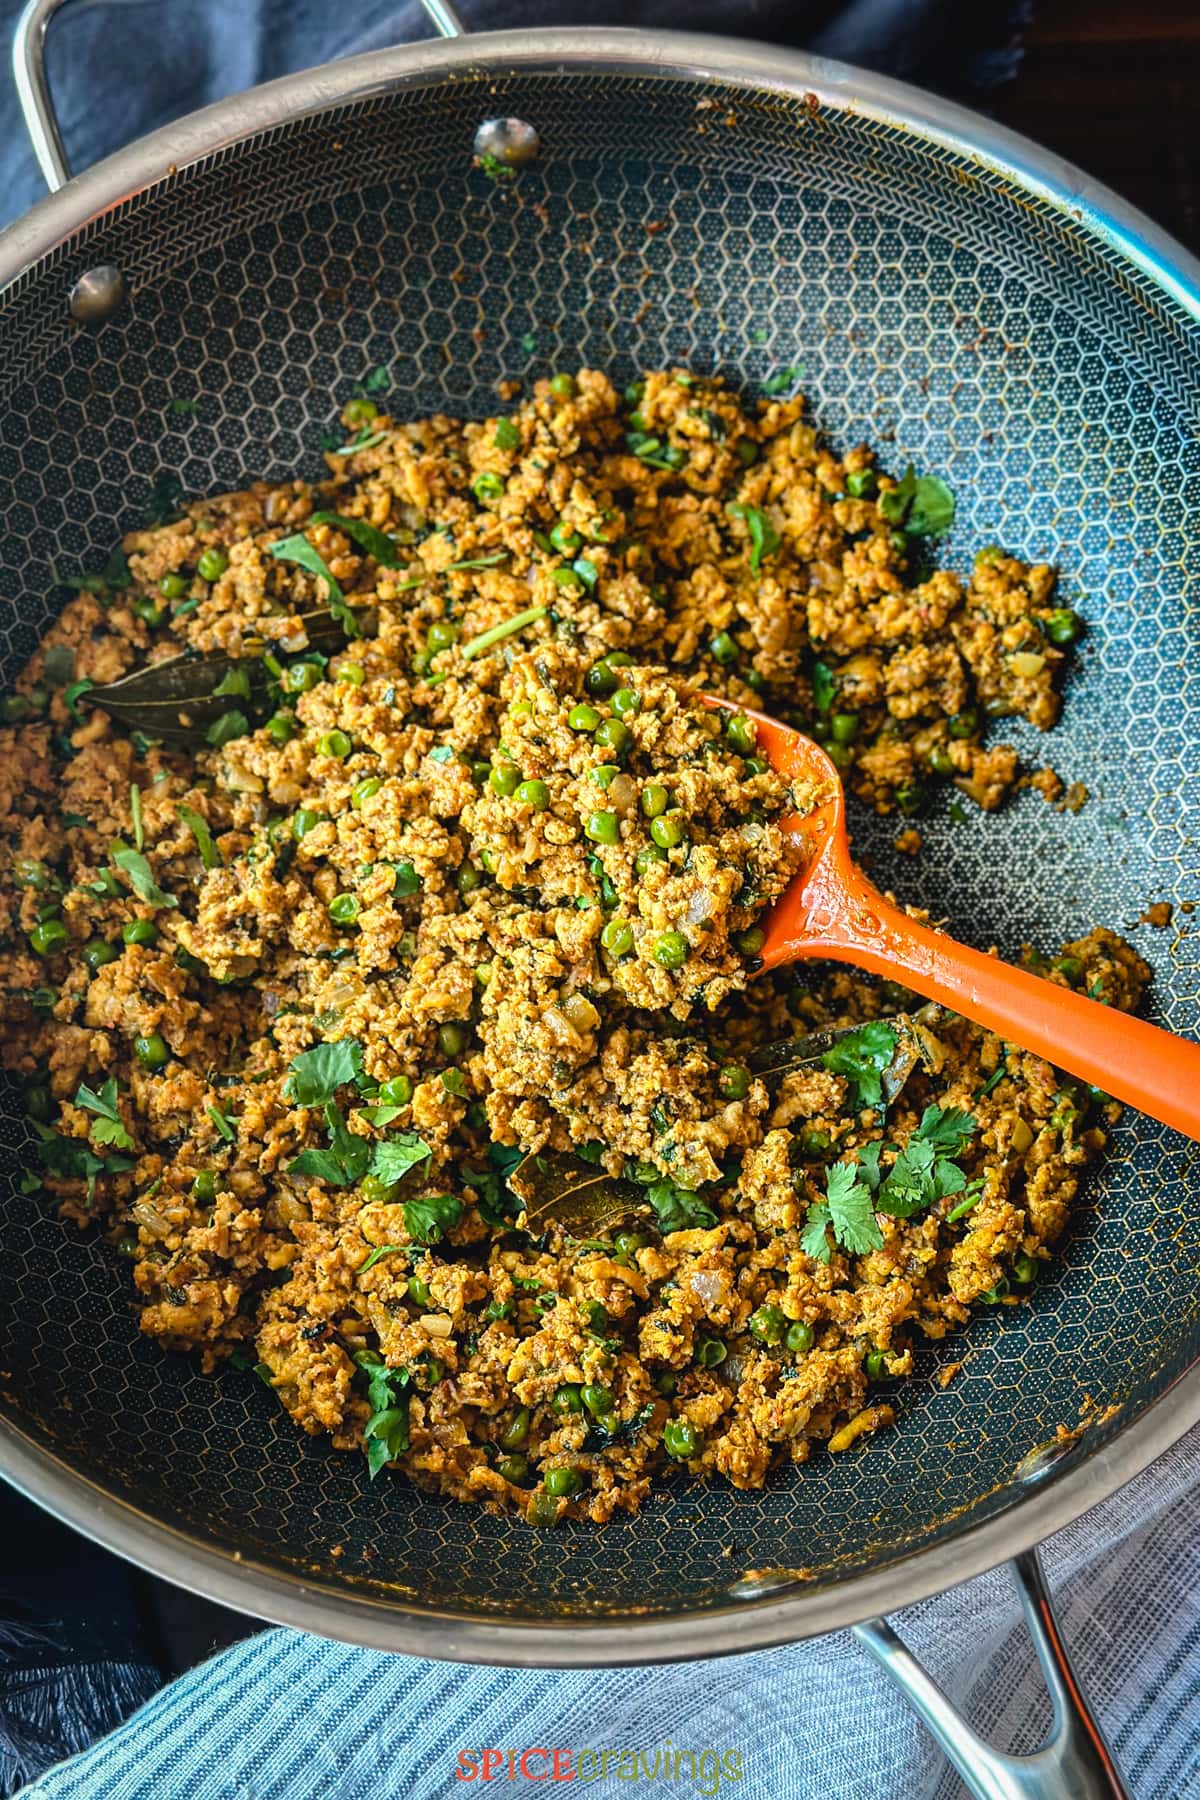 Indian spiced ground meat and peas, Keema Matar, served in a copper bowl, garnished with cilantro